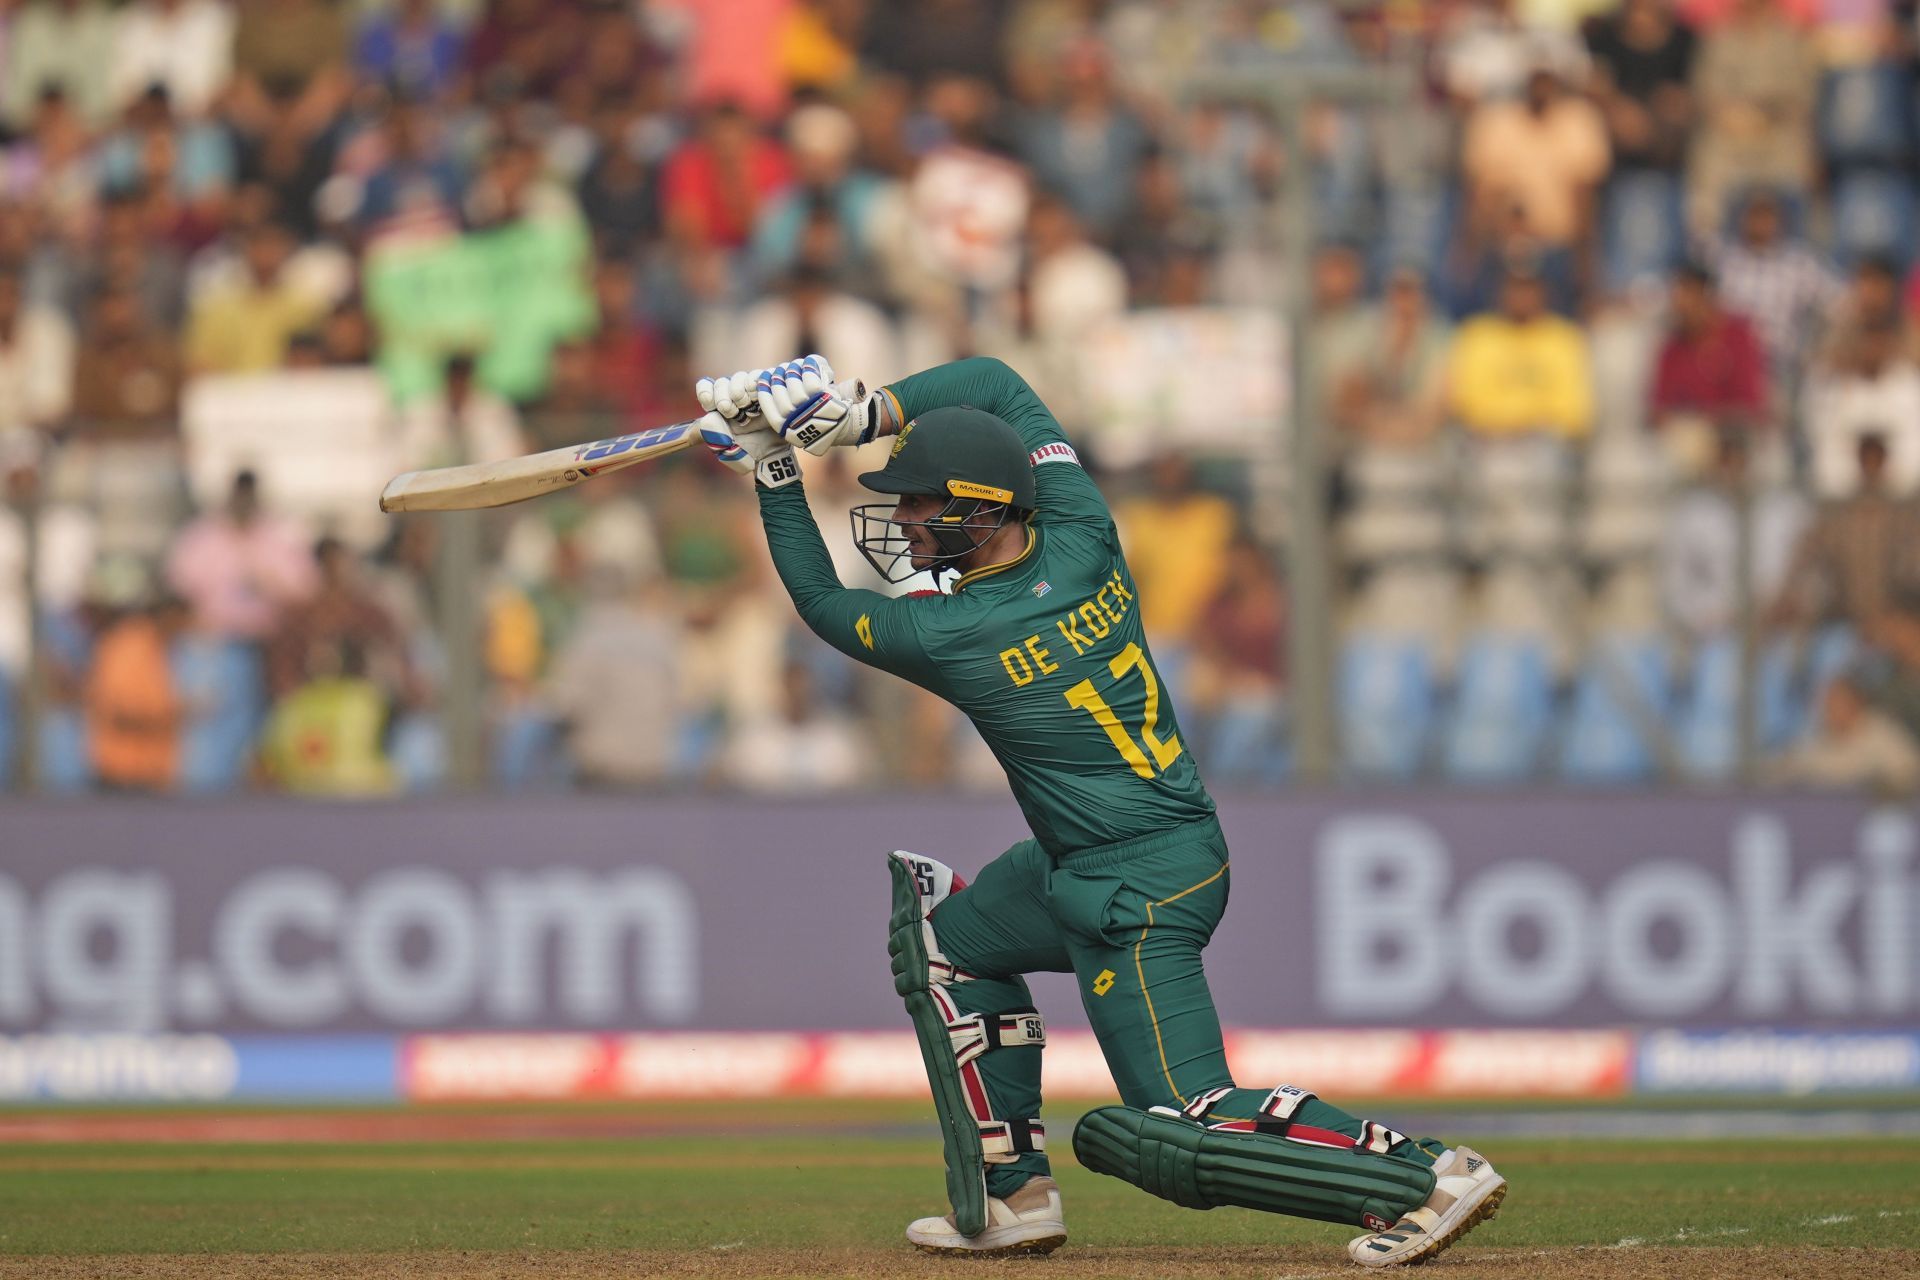 Quinton de Kock struck 15 fours and seven sixes during his innings. [P/C: AP]